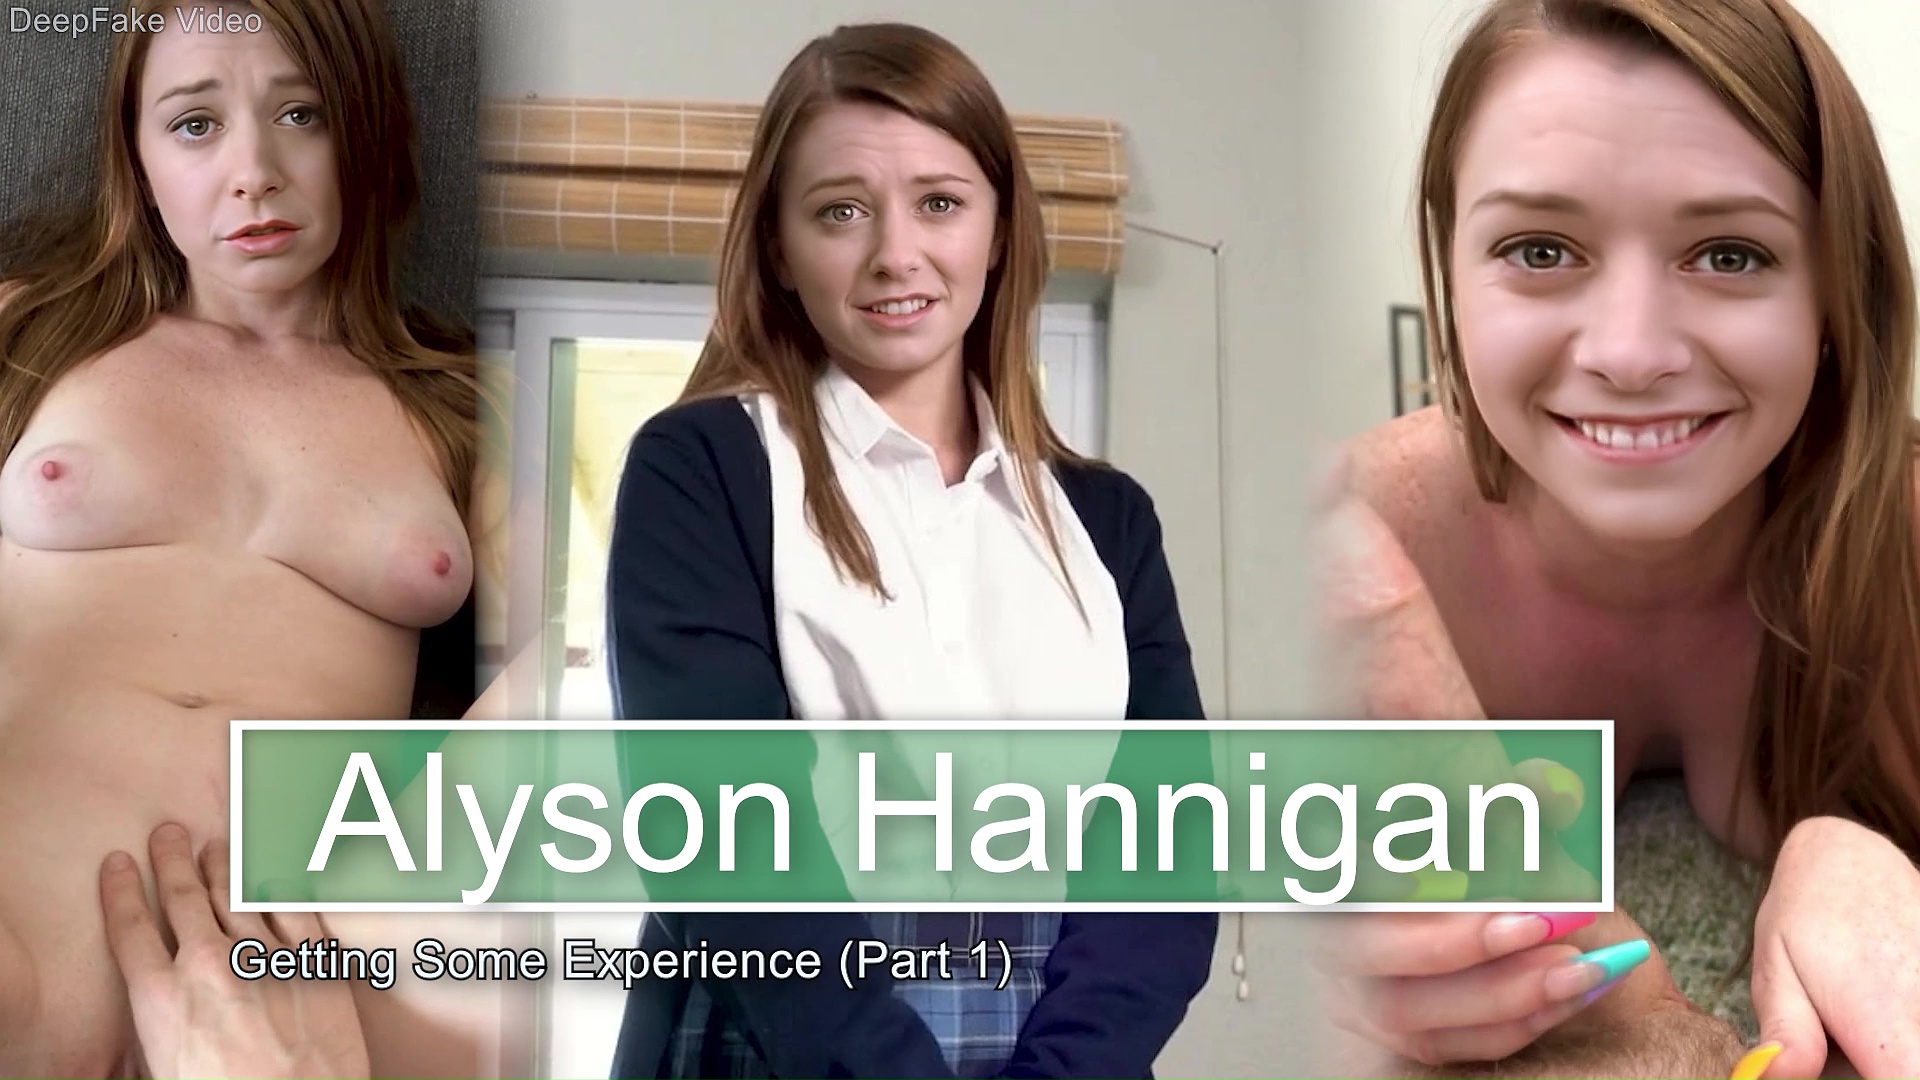 Alyson Hannigan - Getting Some Experience (Part 1) - Trailer